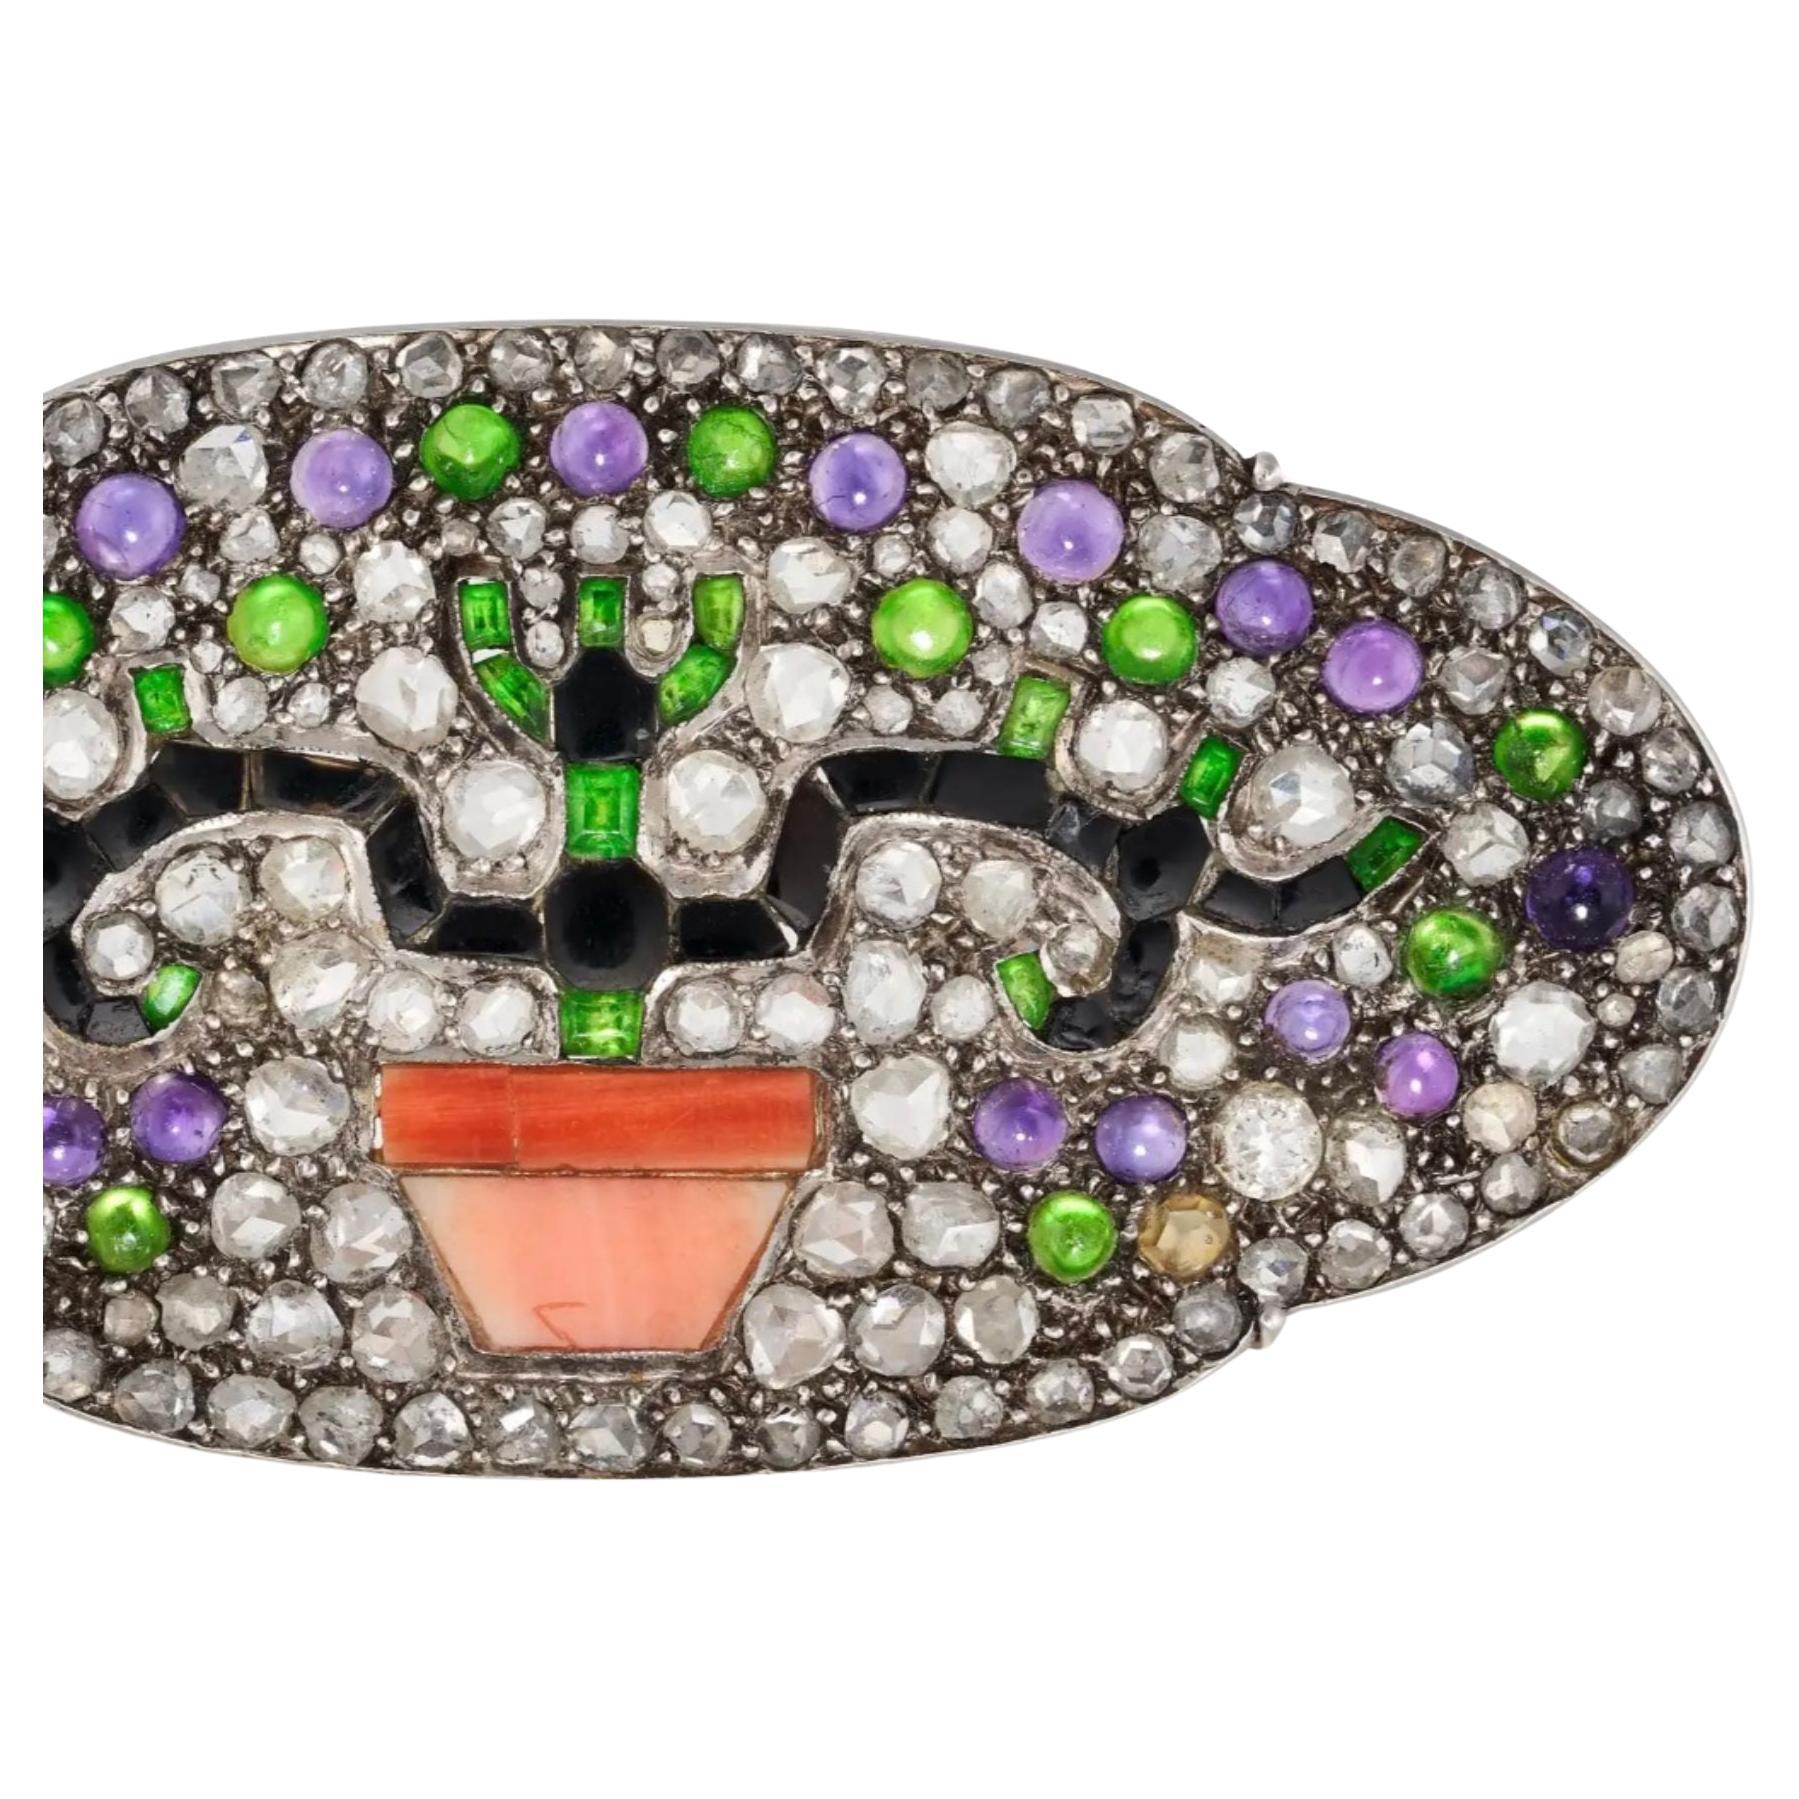 This art deco brooch is of magnificent design and highlights a lovely combination of gems. The subject is an onyx symmetrical bonsai tree planted  in a polished coral pot. The onyx branches provide a structure to the sparkling background of round